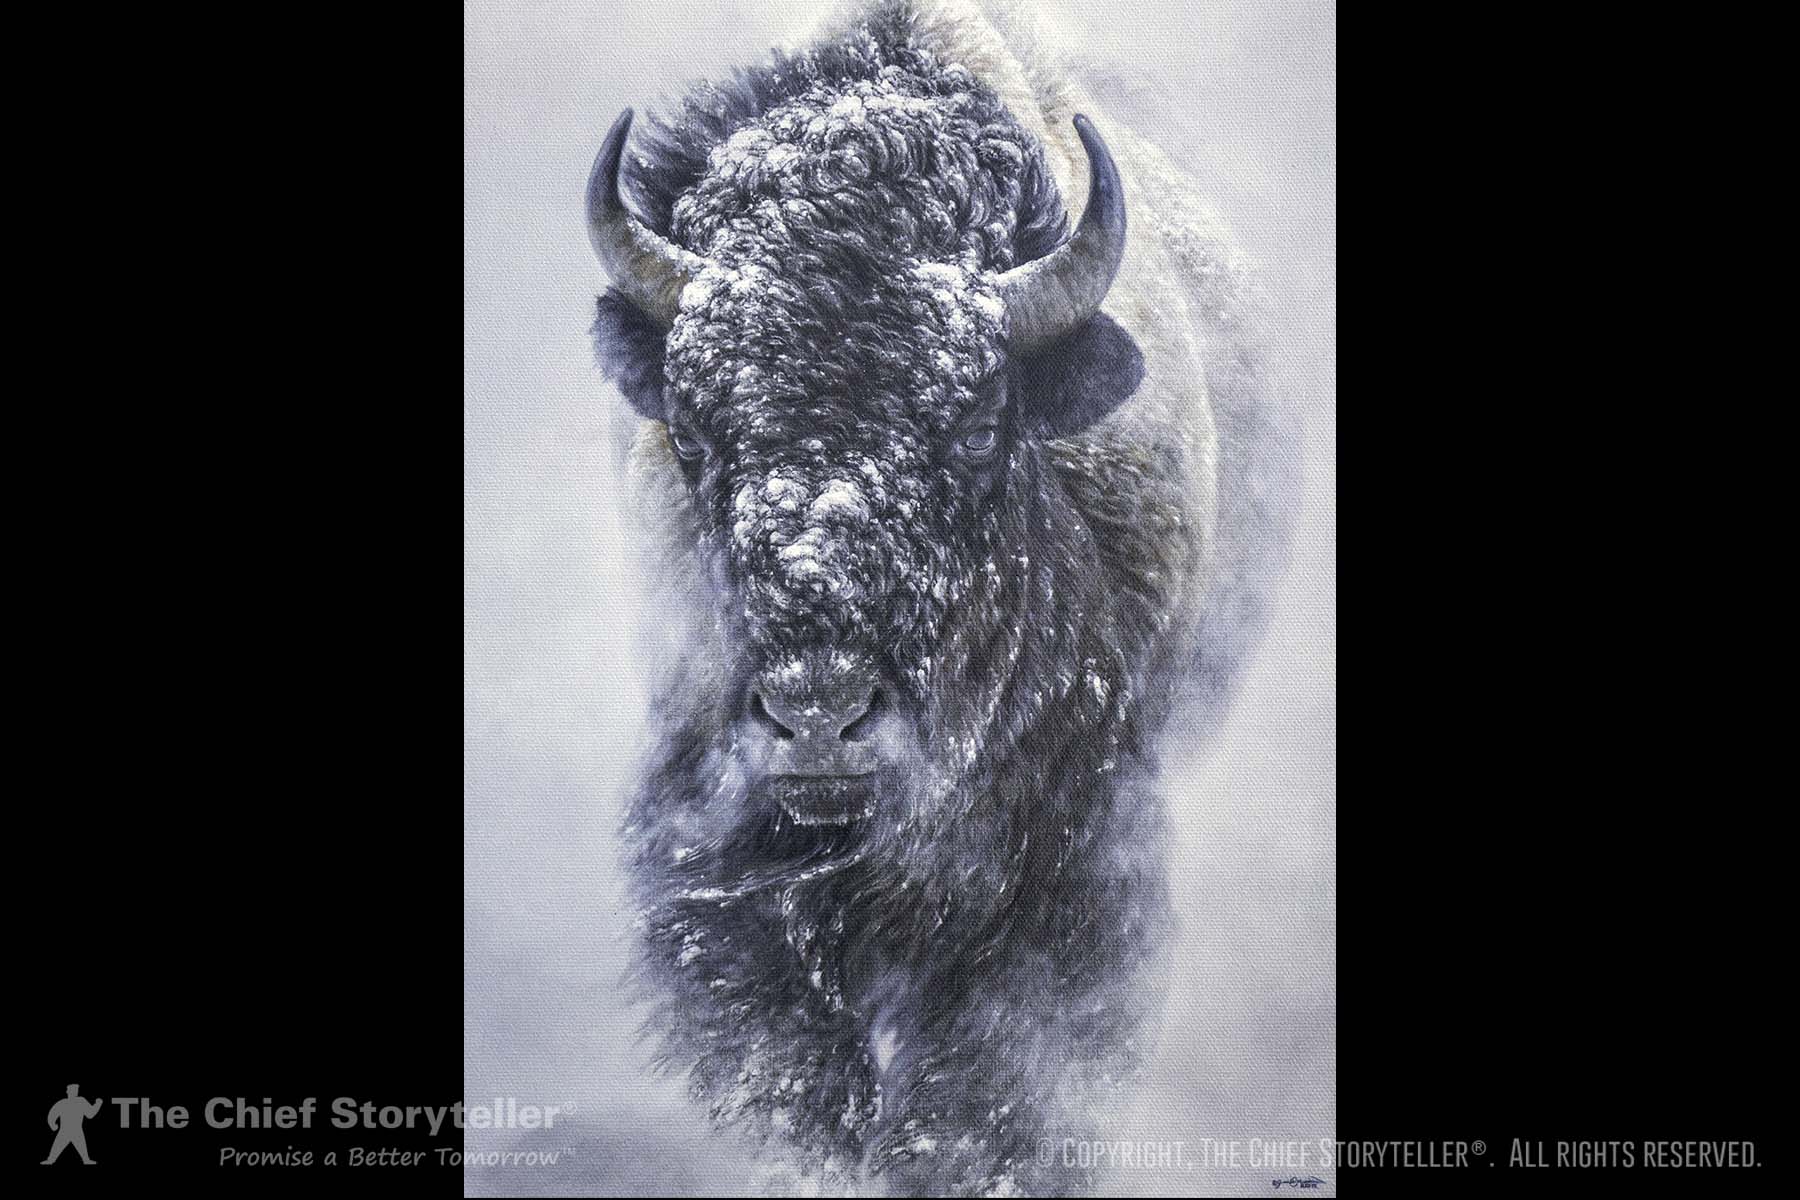 bison painting has deep meaning for company CEO, which translates to culture - example of a symbol